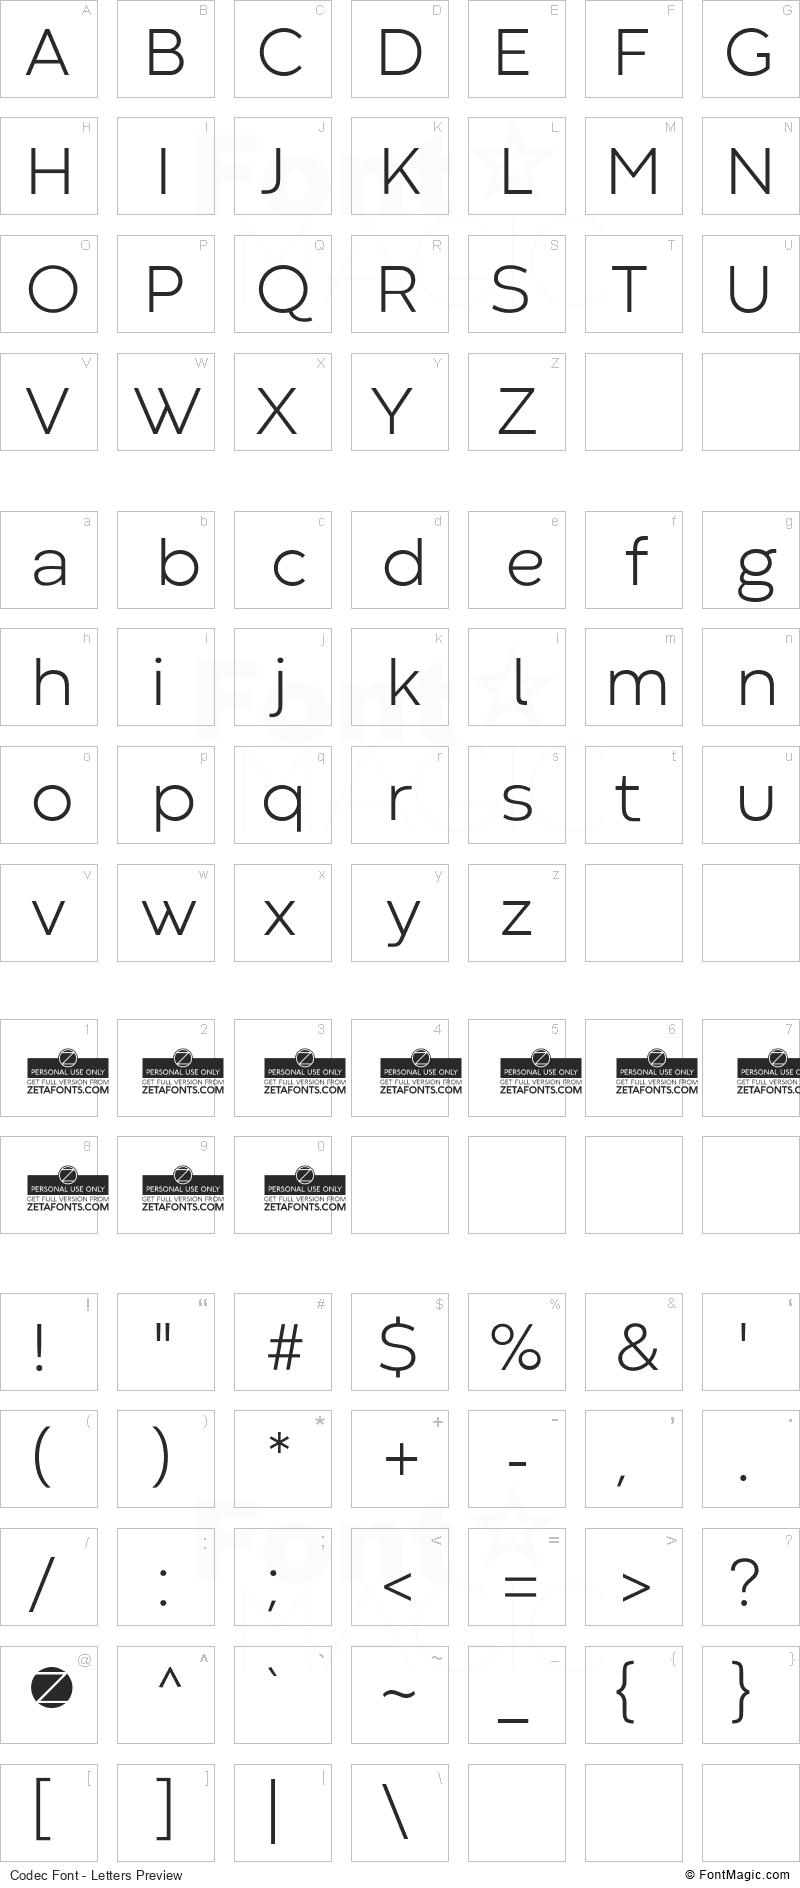 Codec Font - All Latters Preview Chart